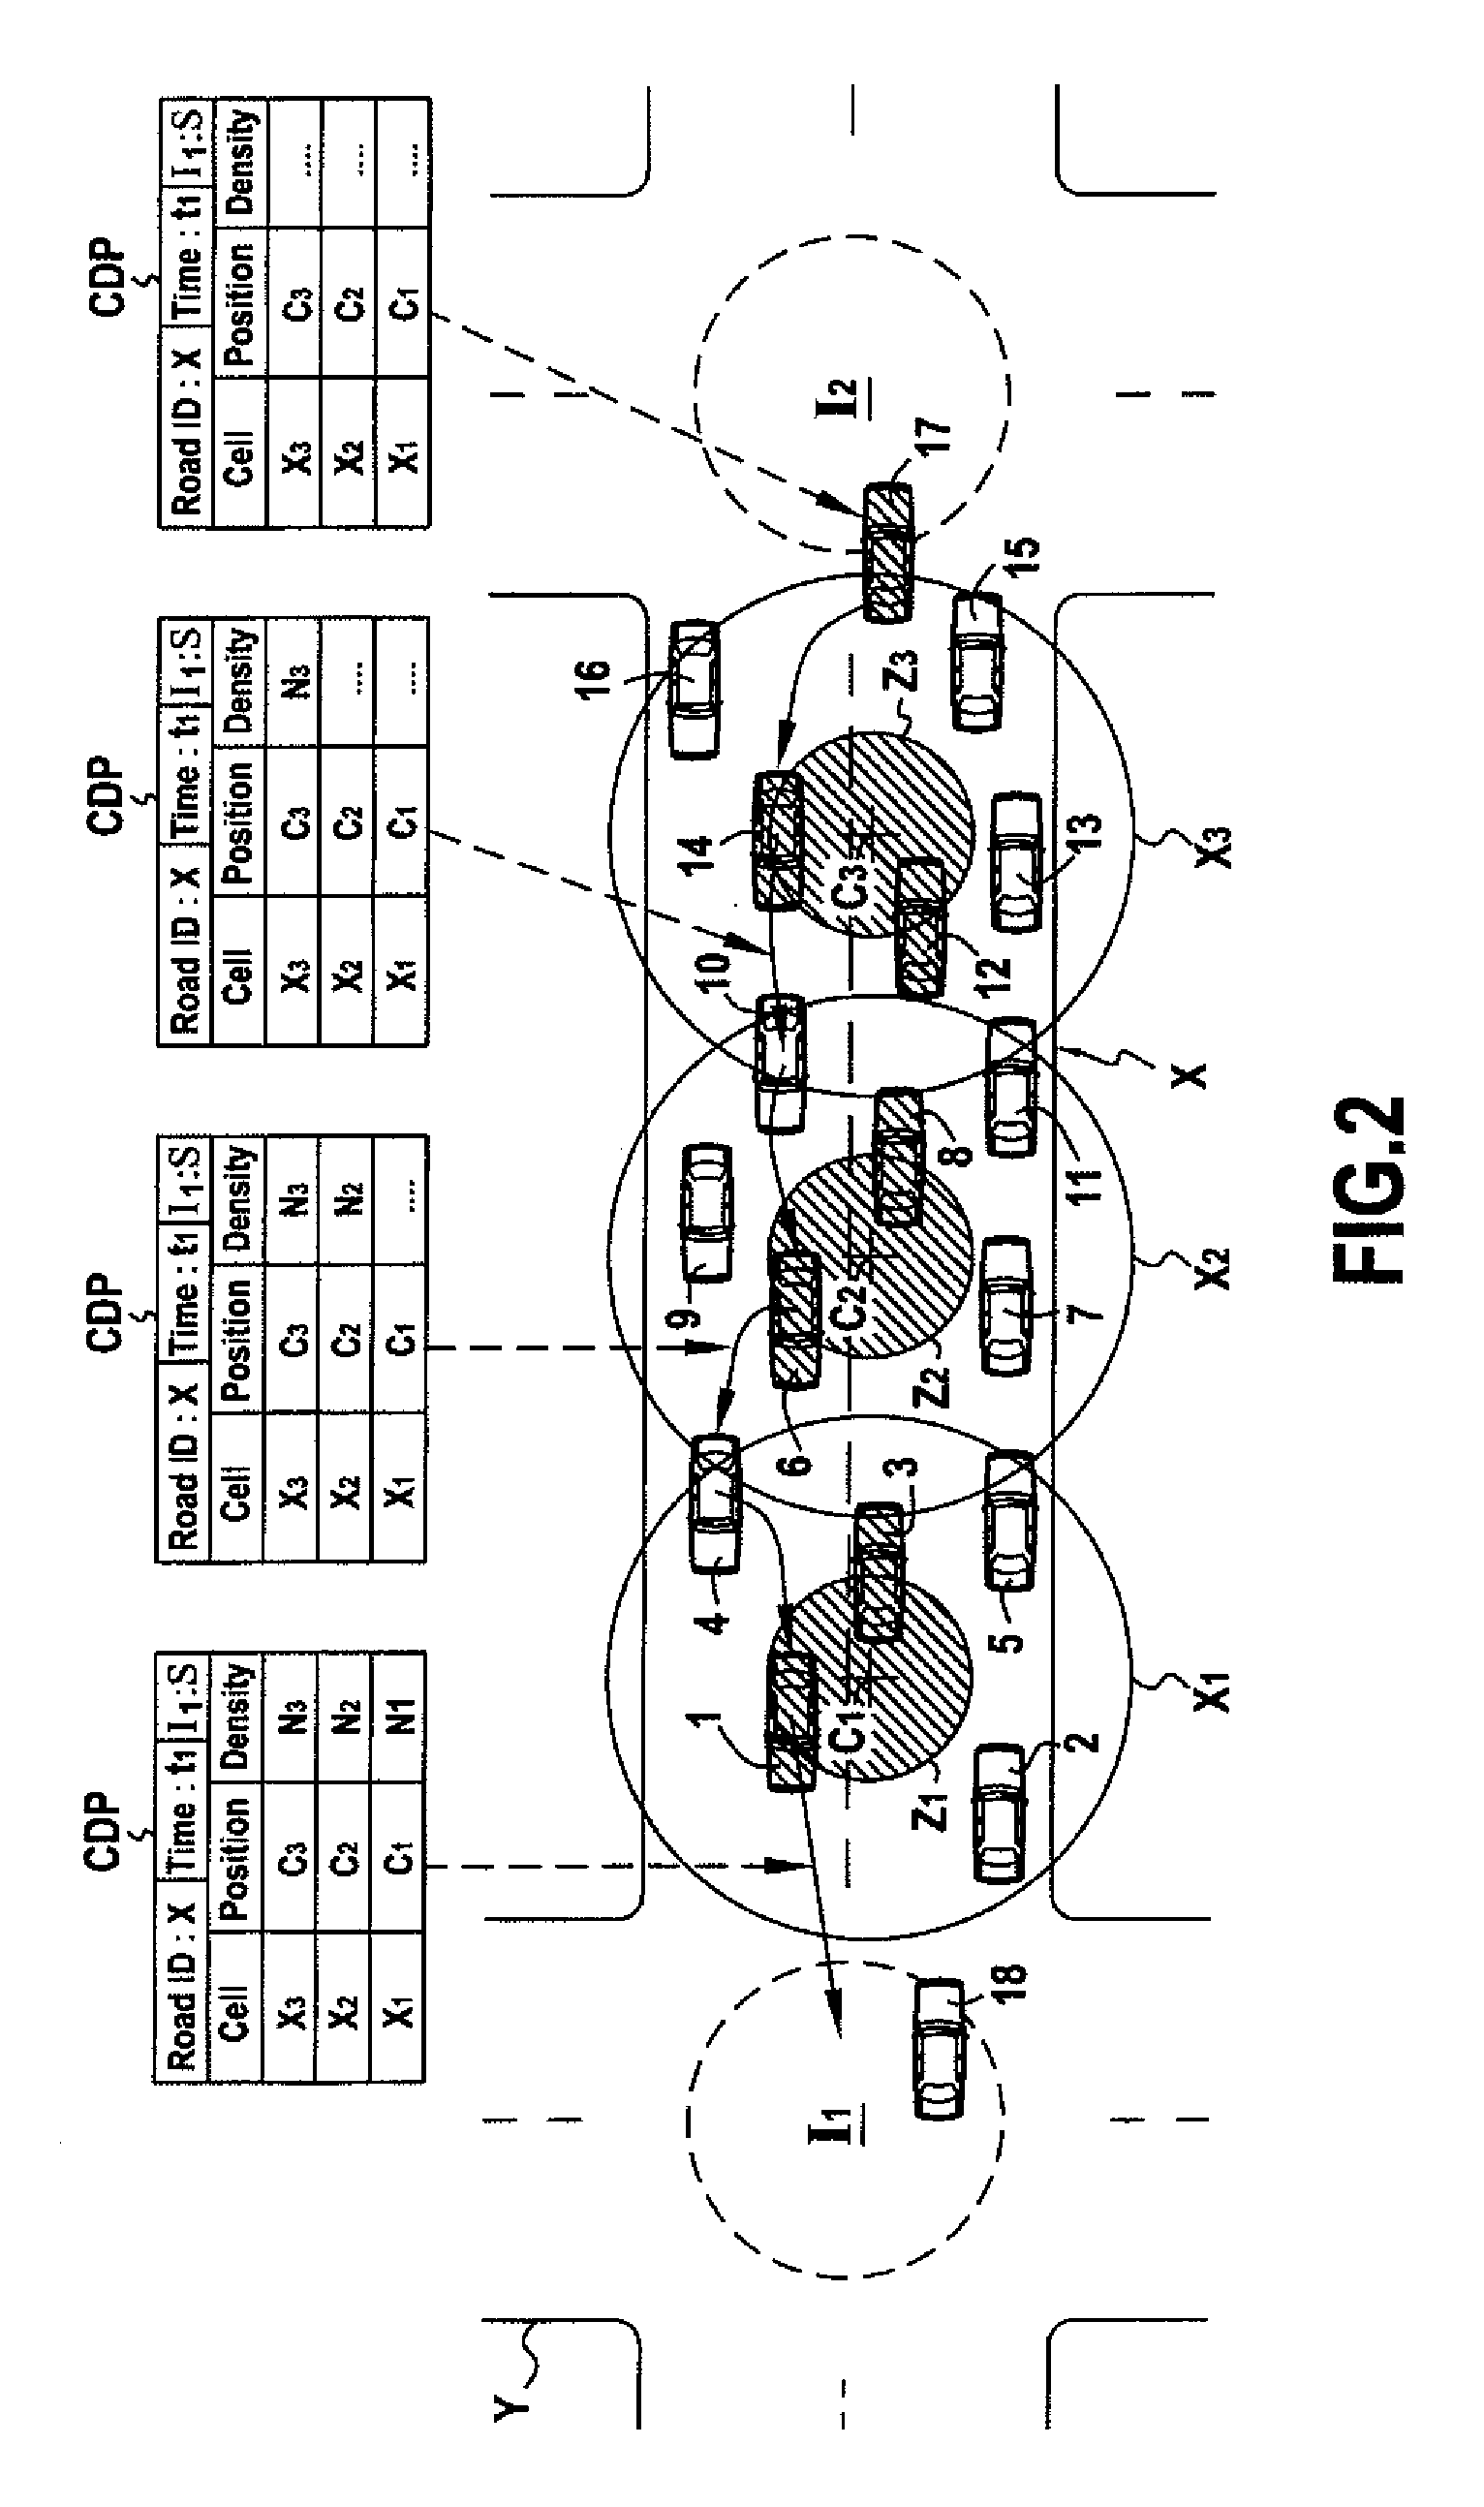 Method for Estimating and Signalling the Density of Mobile Nodes in a Road Network